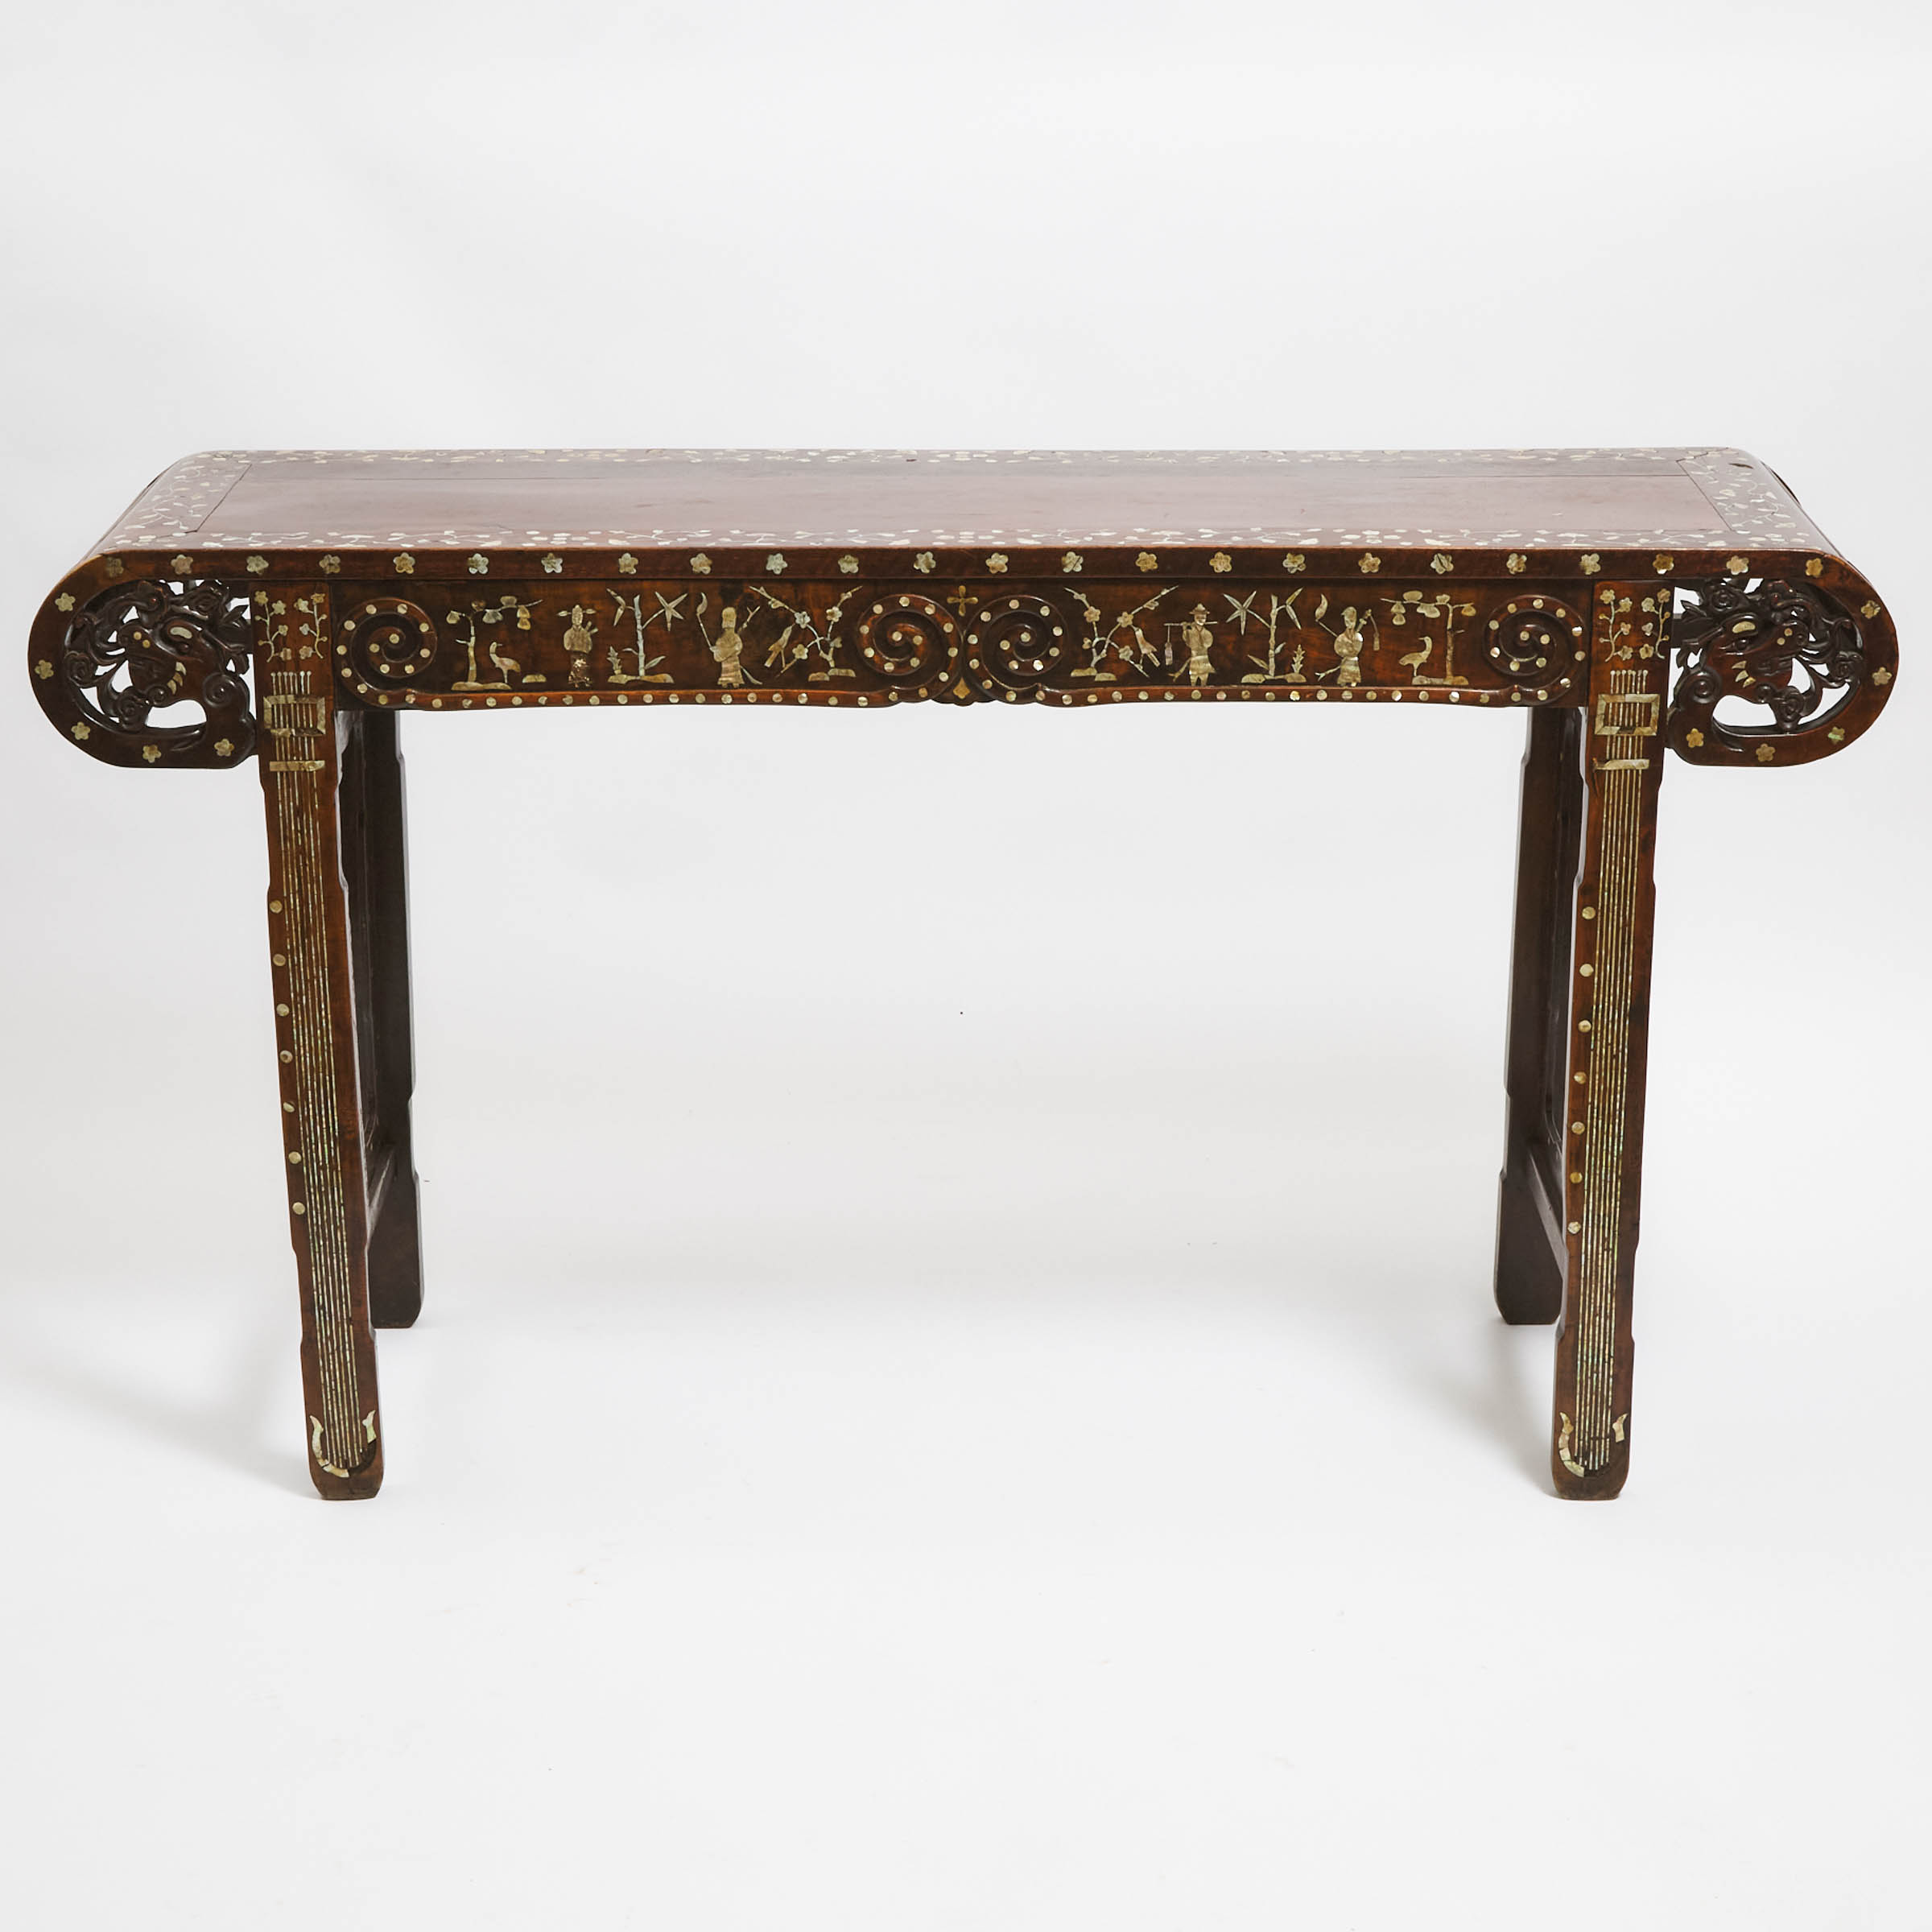 A Mother-of-Pearl Inlaid Rosewood Altar Table, Late Qing Dynasty